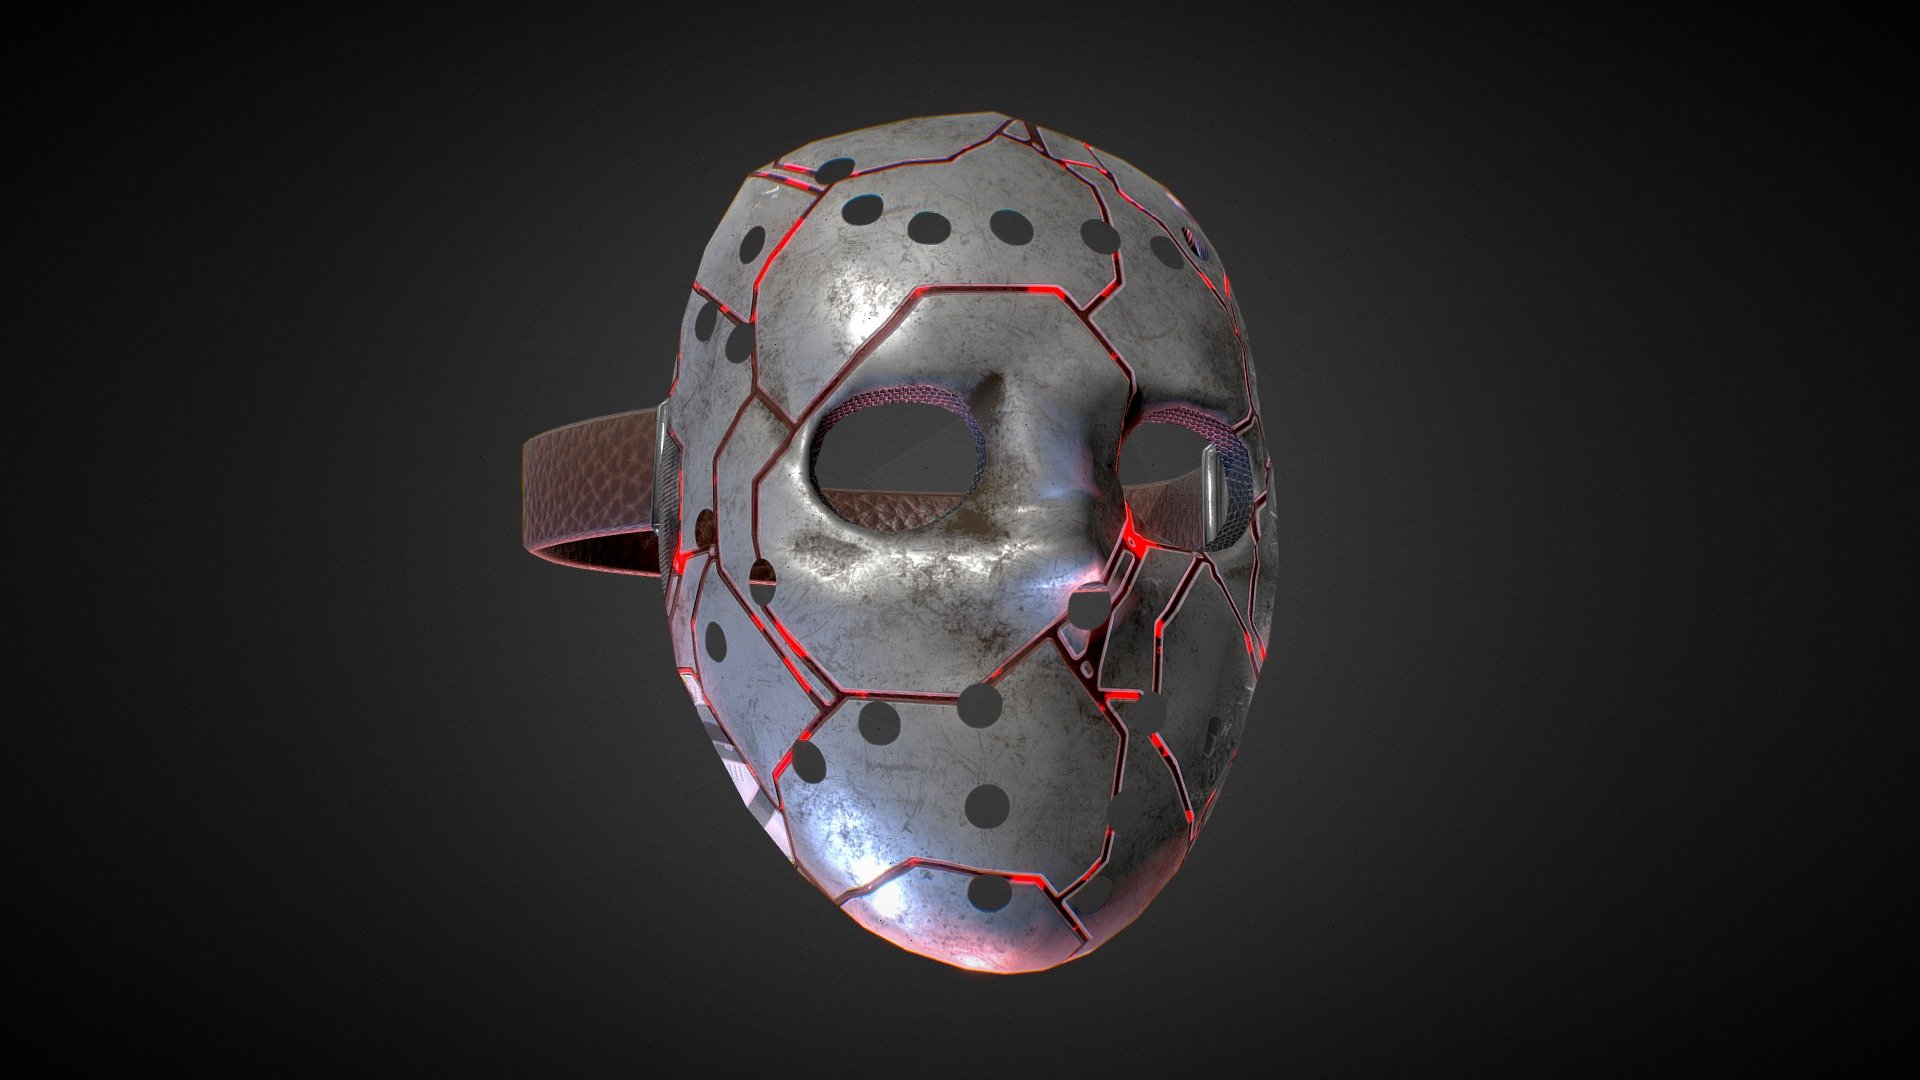 Made in Blender &amp; Substance Painter. Fitted and Rigged to the standard male metahuman.

Links to social media and support: https://linktr.ee/tikodev

Get exclusive models and support me: patreon.com/tiko - Hockey Mask Cyberpunk (Metahuman Ready) - Buy Royalty Free 3D model by Tiko (@tikoavp) 3d model